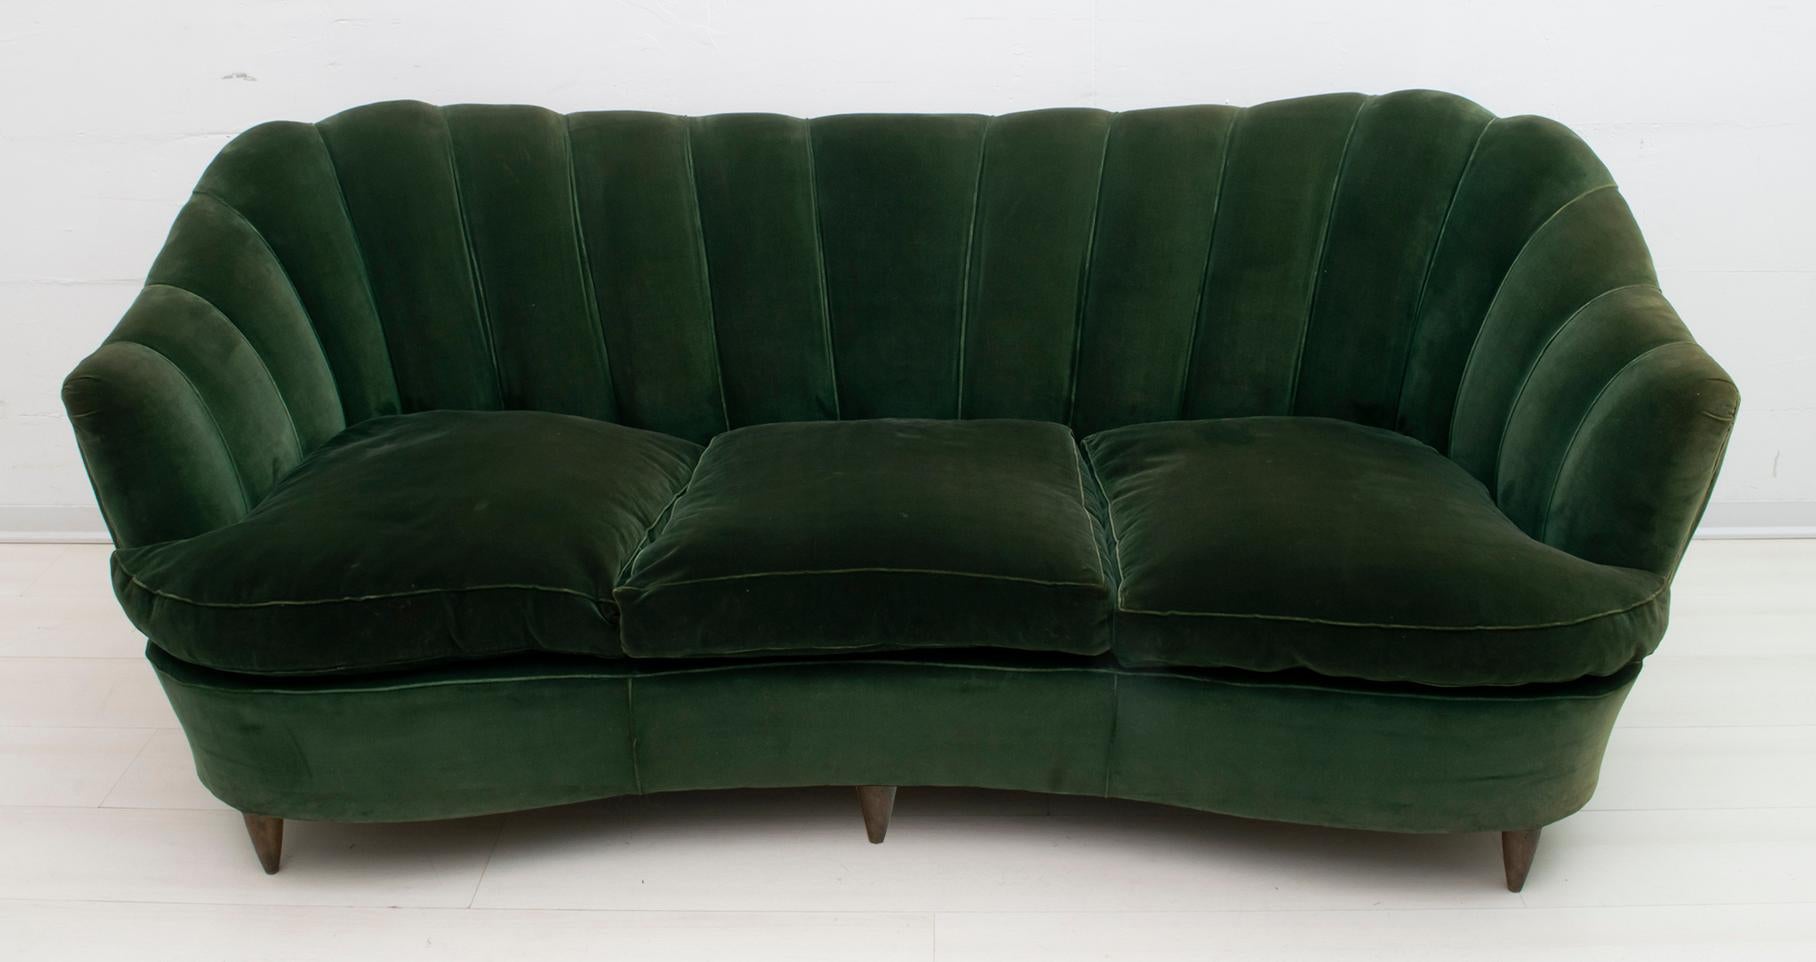 A rare sofa by Gio Ponti for Home and Garden, 1936.
Shell model covered in original green velvet of the time, with goose down cushions. The coating, as shown in the photo, has faded in some parts.

With an additional cost we can provide for